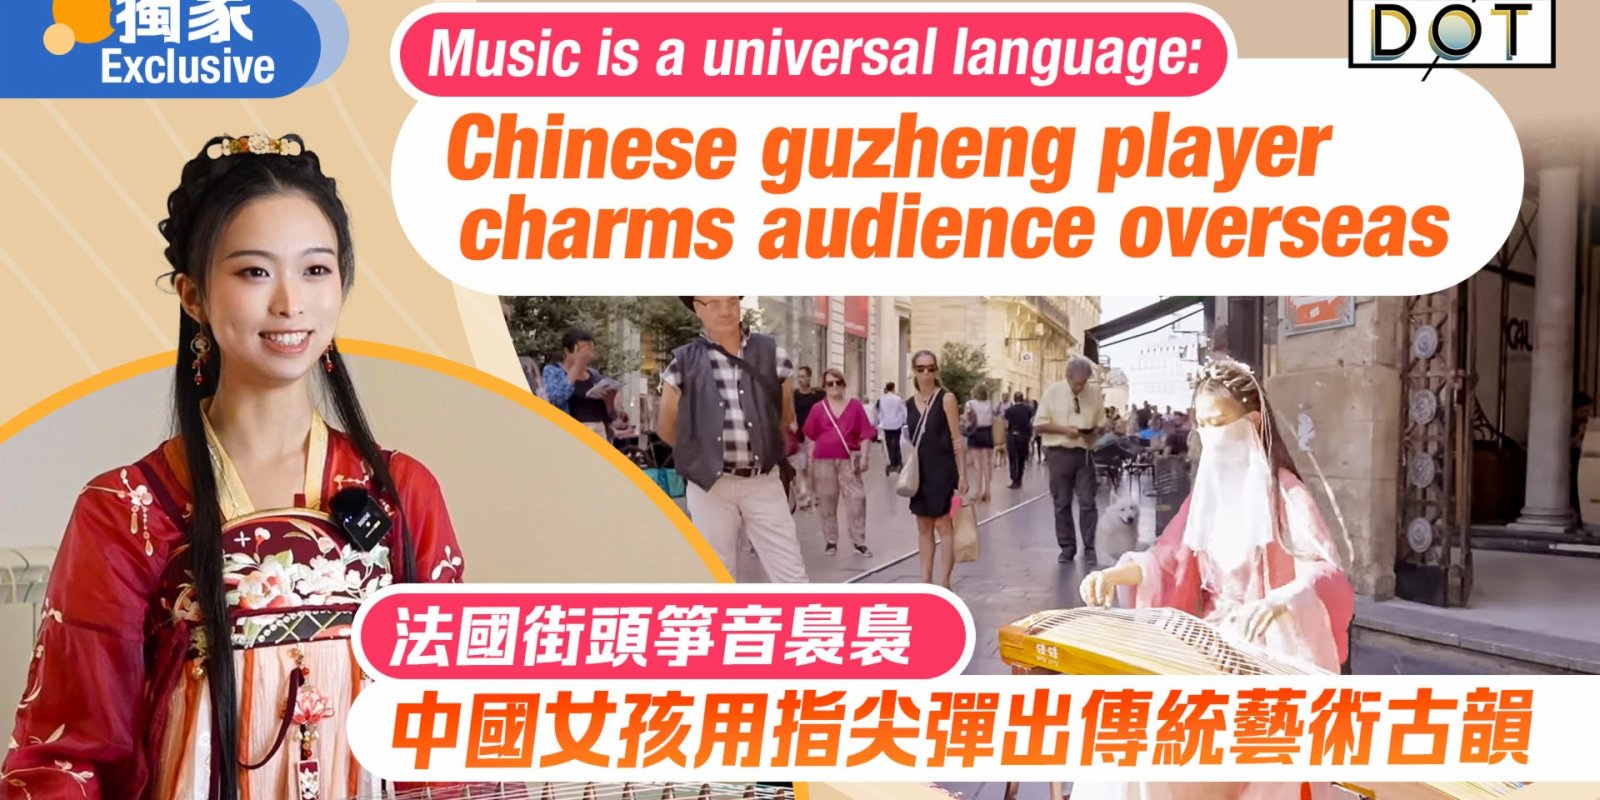 Exclusive | Music is a universal language: Chinese guzheng player charms audience overseas